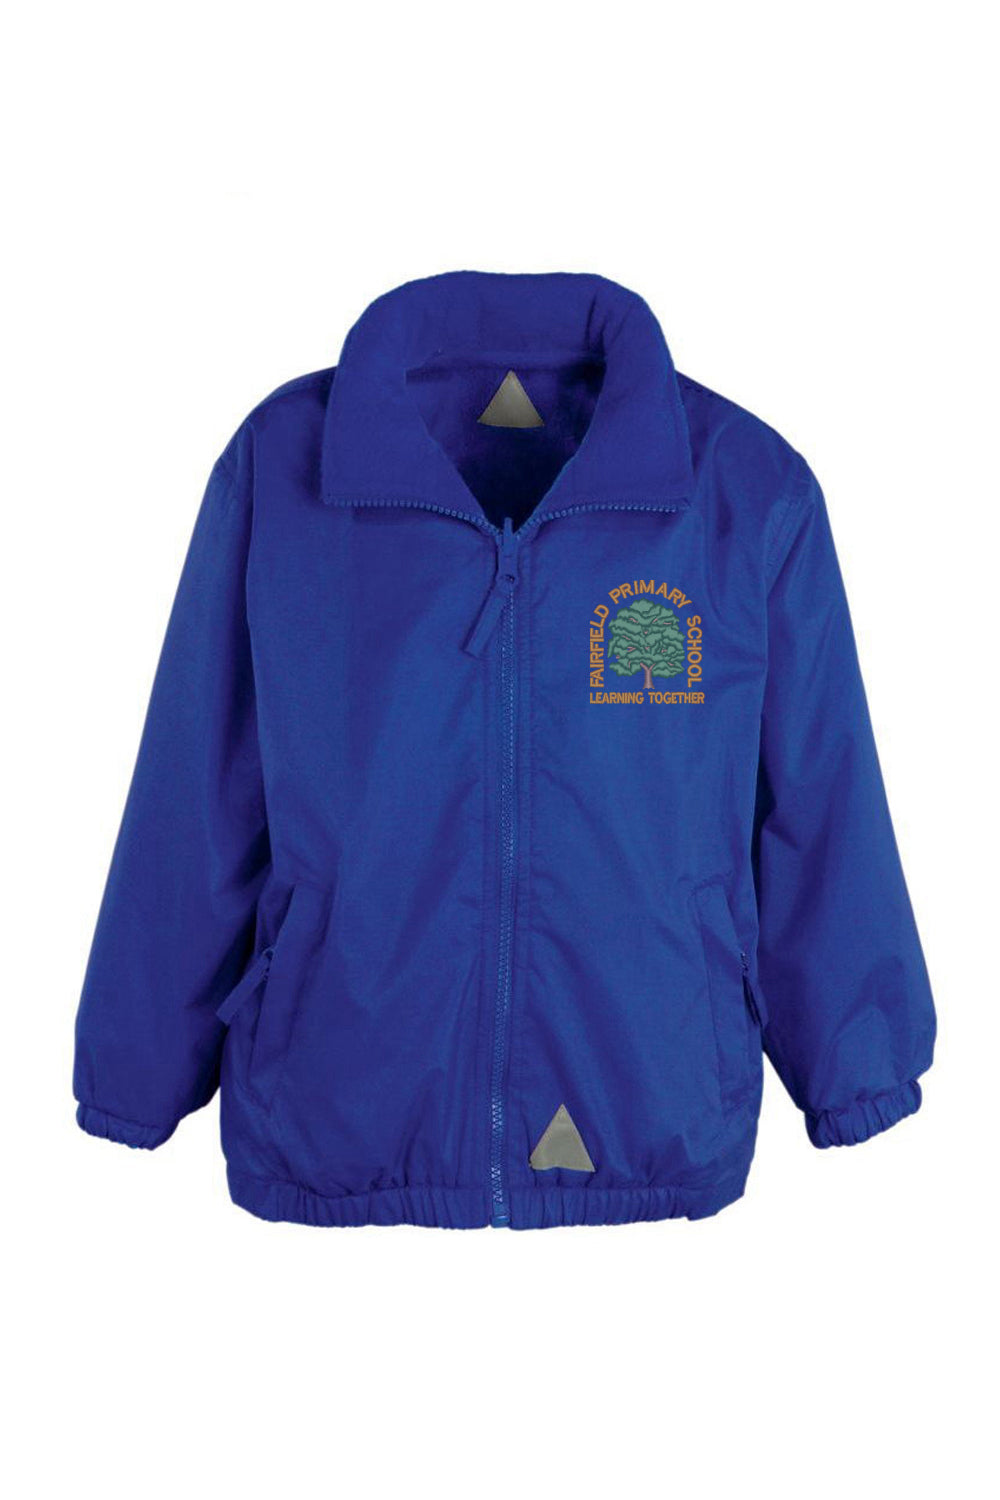 Fairfield Primary Royal Blue Shower Jacket